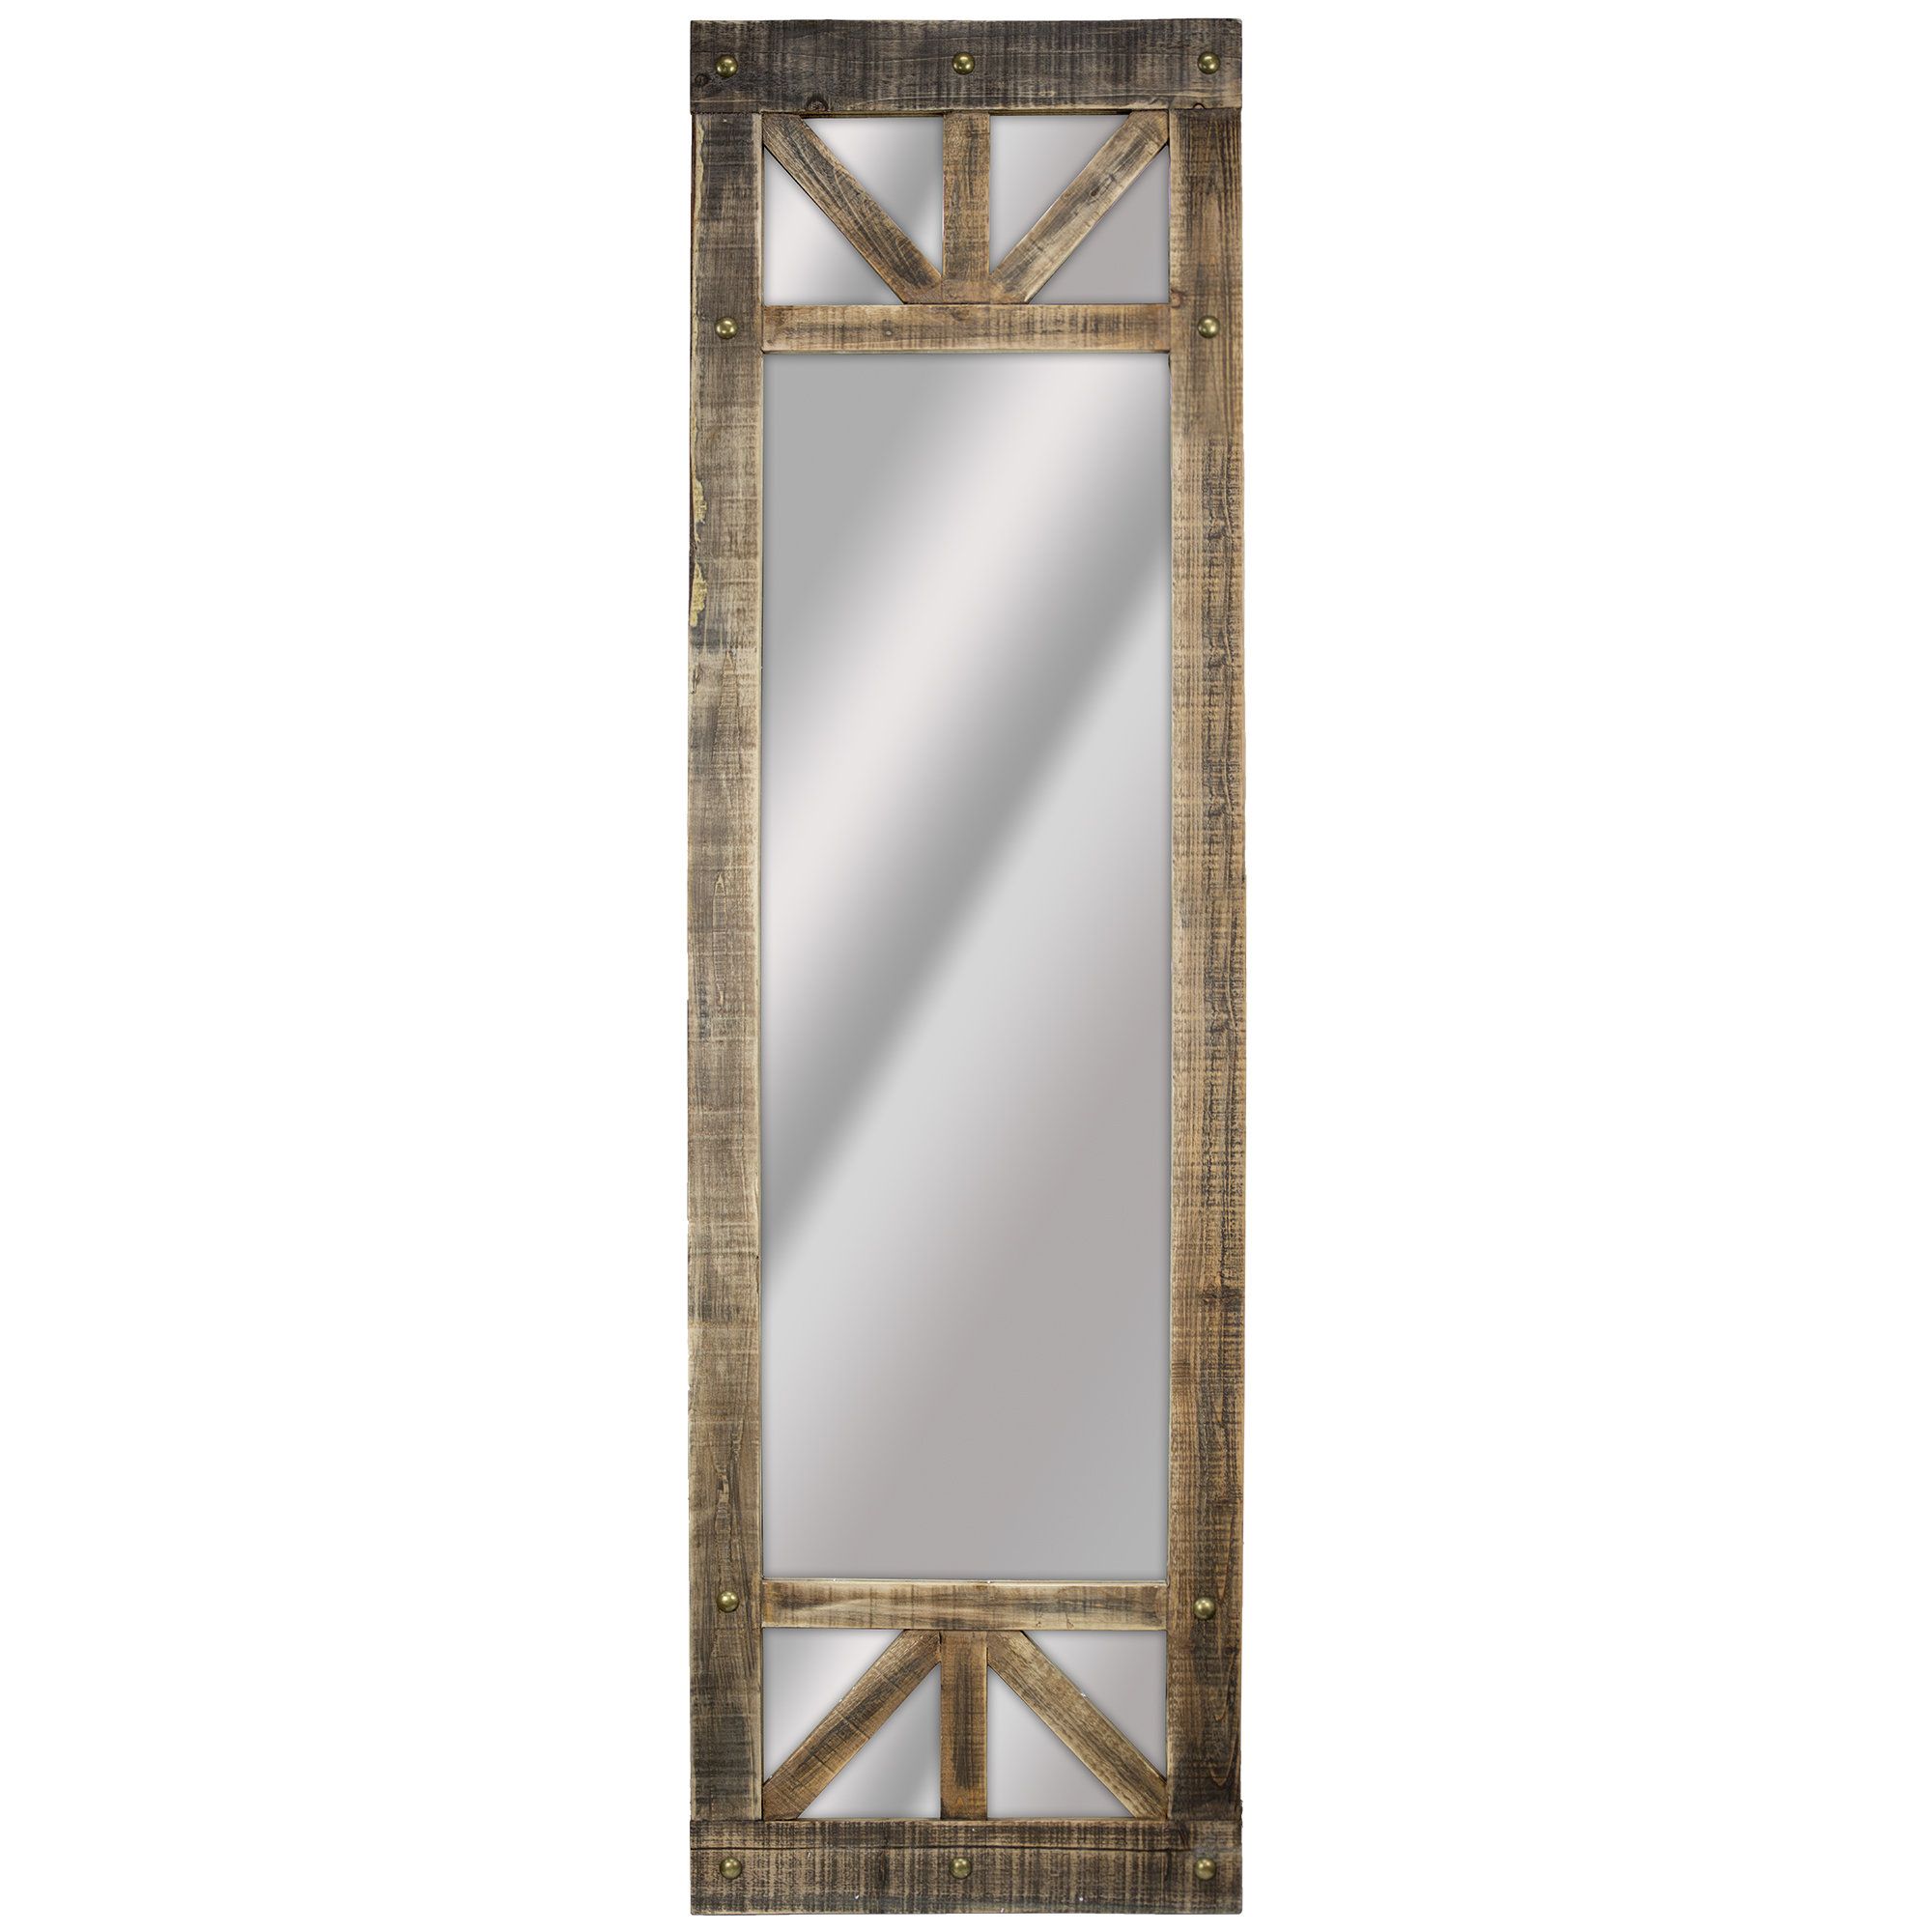 Delicia Décor Rustic Wood Full Length Wall Mirror Pertaining To Boyers Wall Mirrors (View 13 of 20)